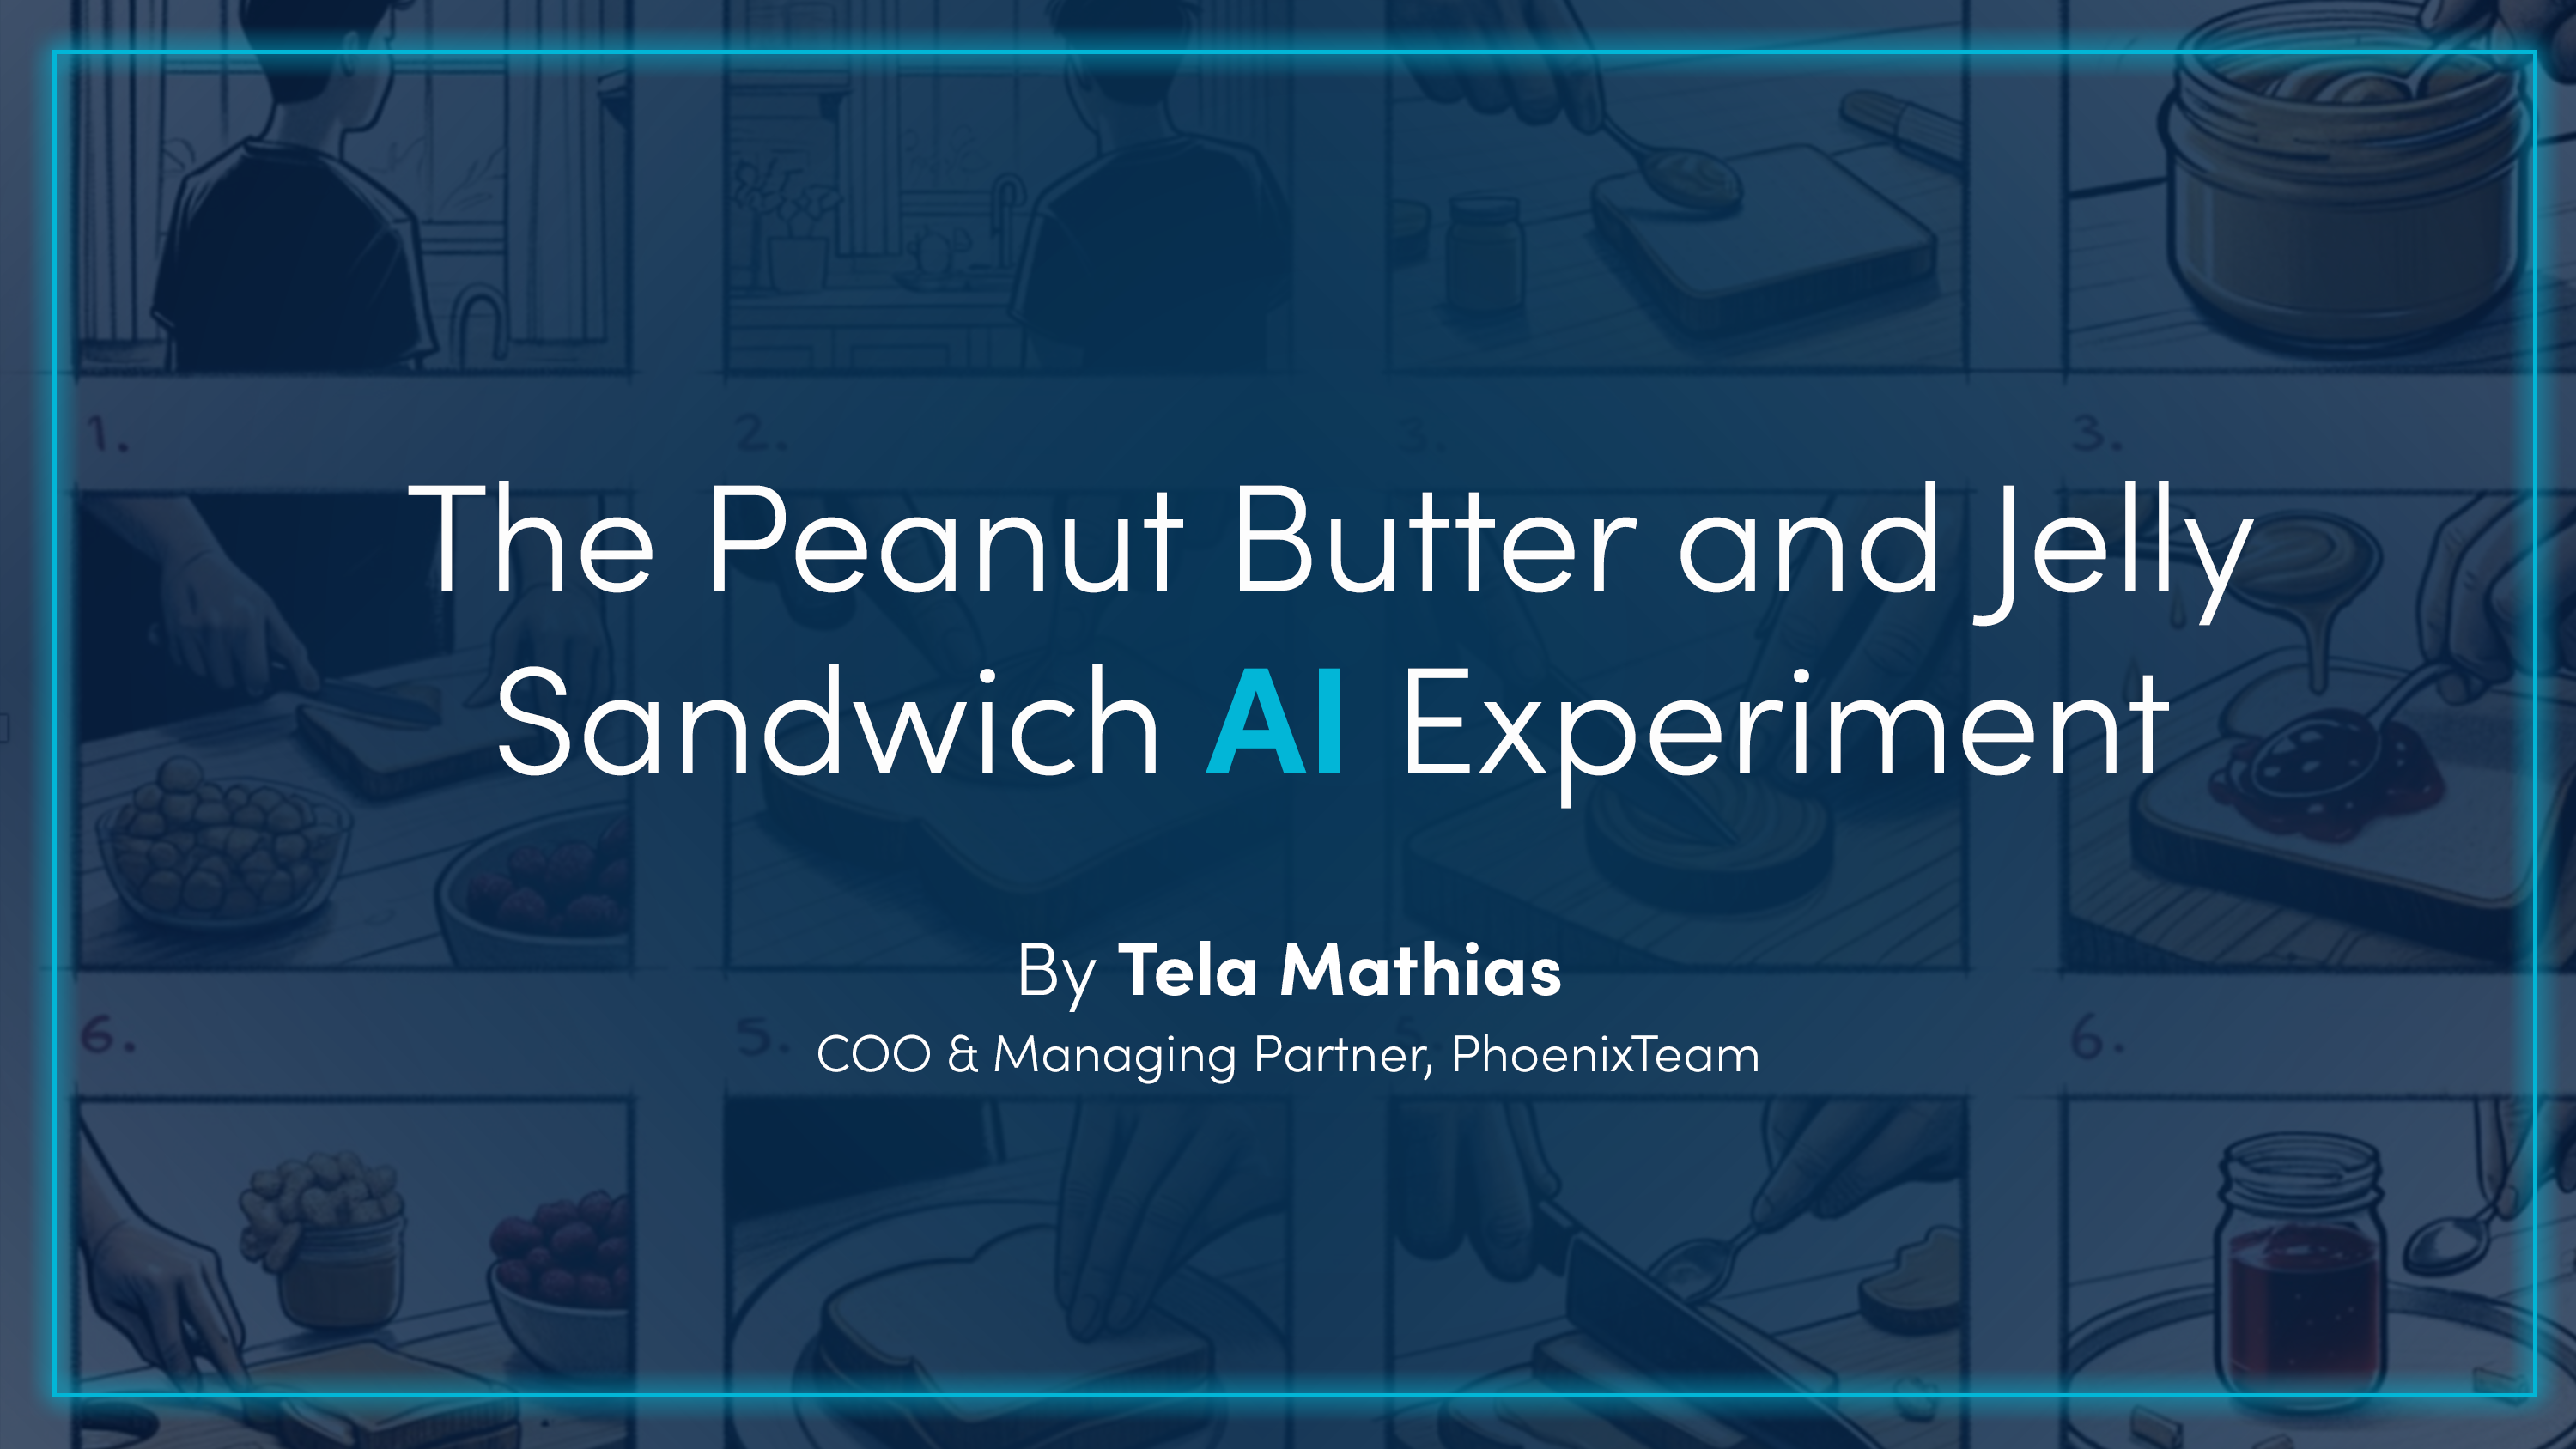 The Peanut Butter and Jelly Sandwich AI Experiment